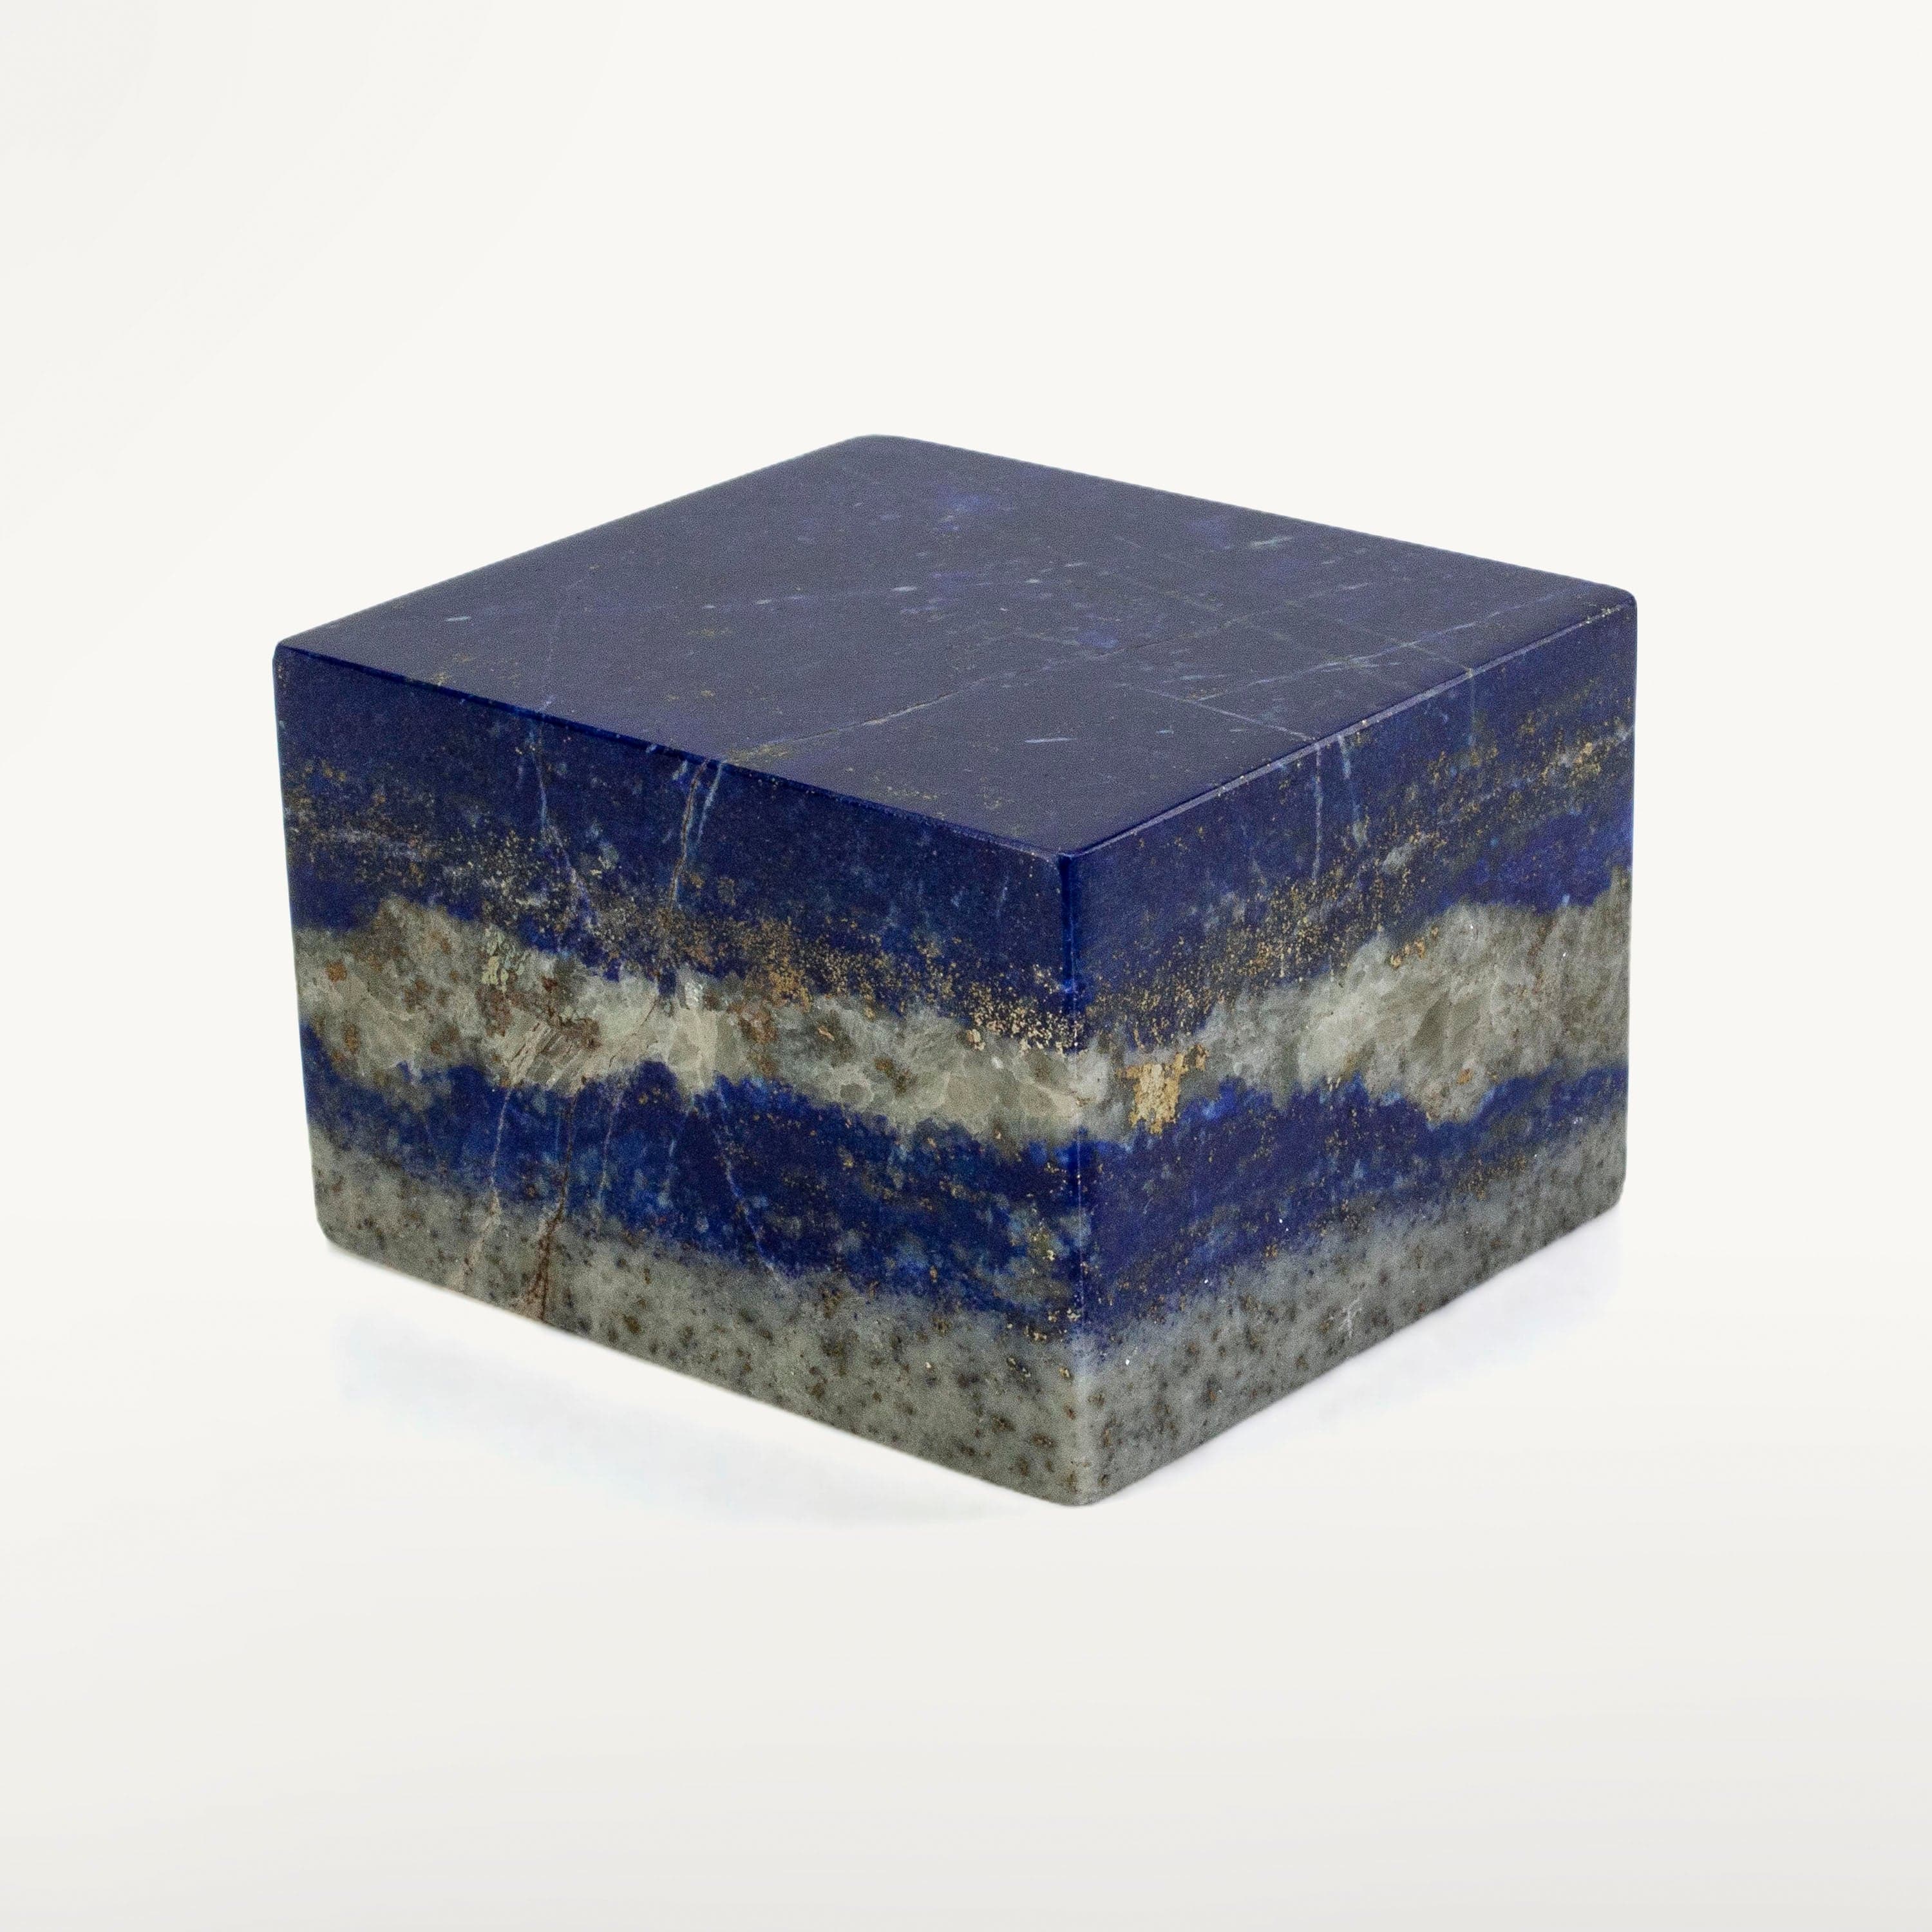 Kalifano Lapis Lapis Lazuil Cube from Afghanistan - 435 g / 1 lbs LP500.003